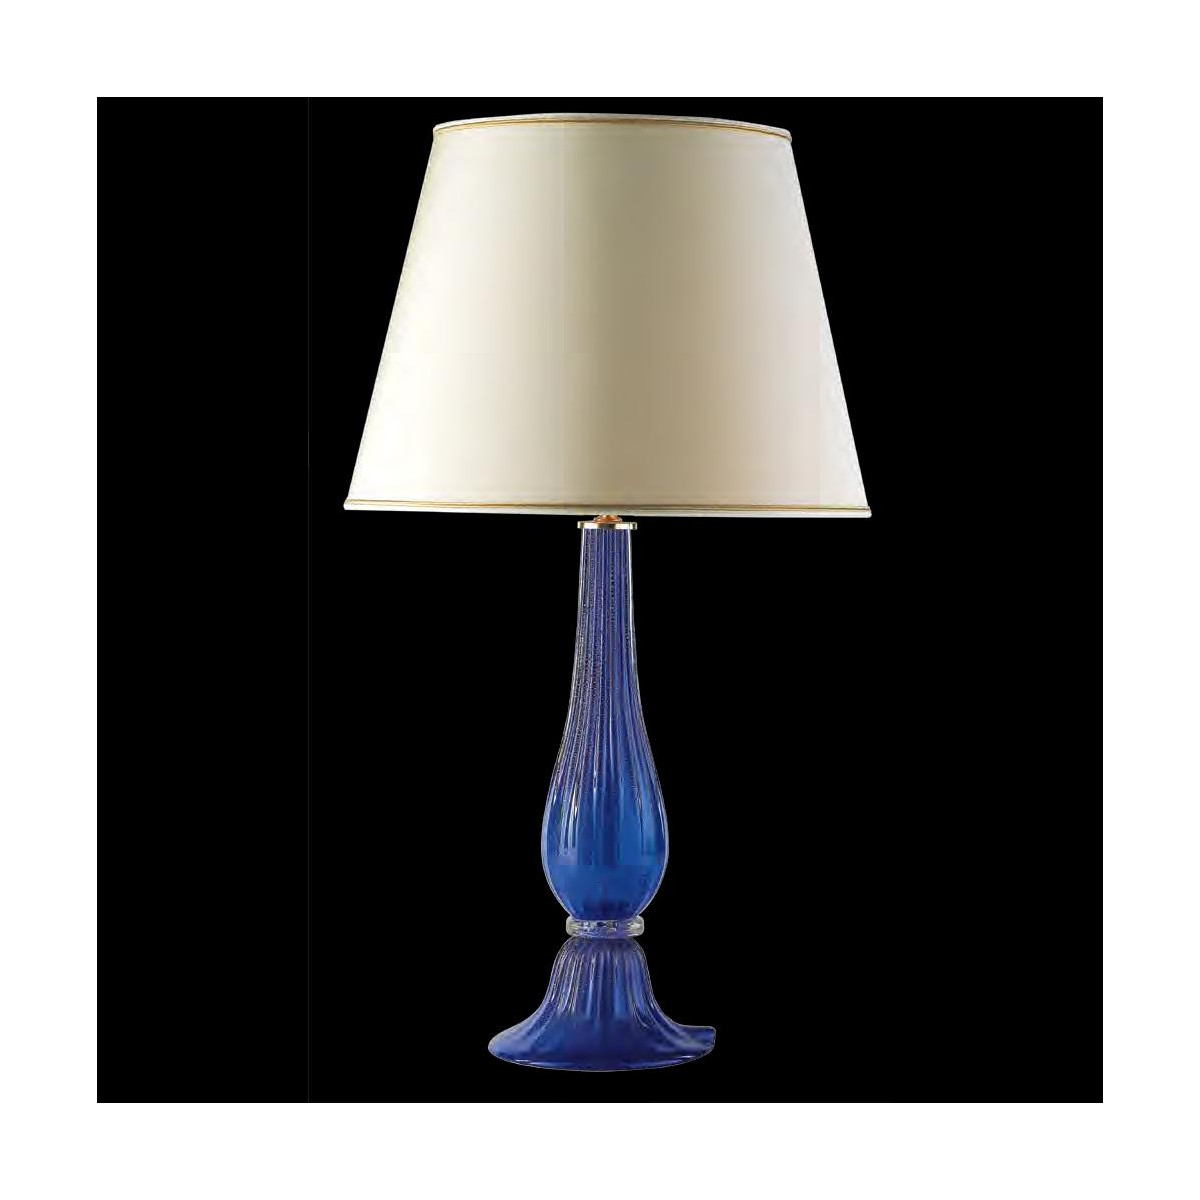 "Alfonso" Murano glass table lamp - blue - small